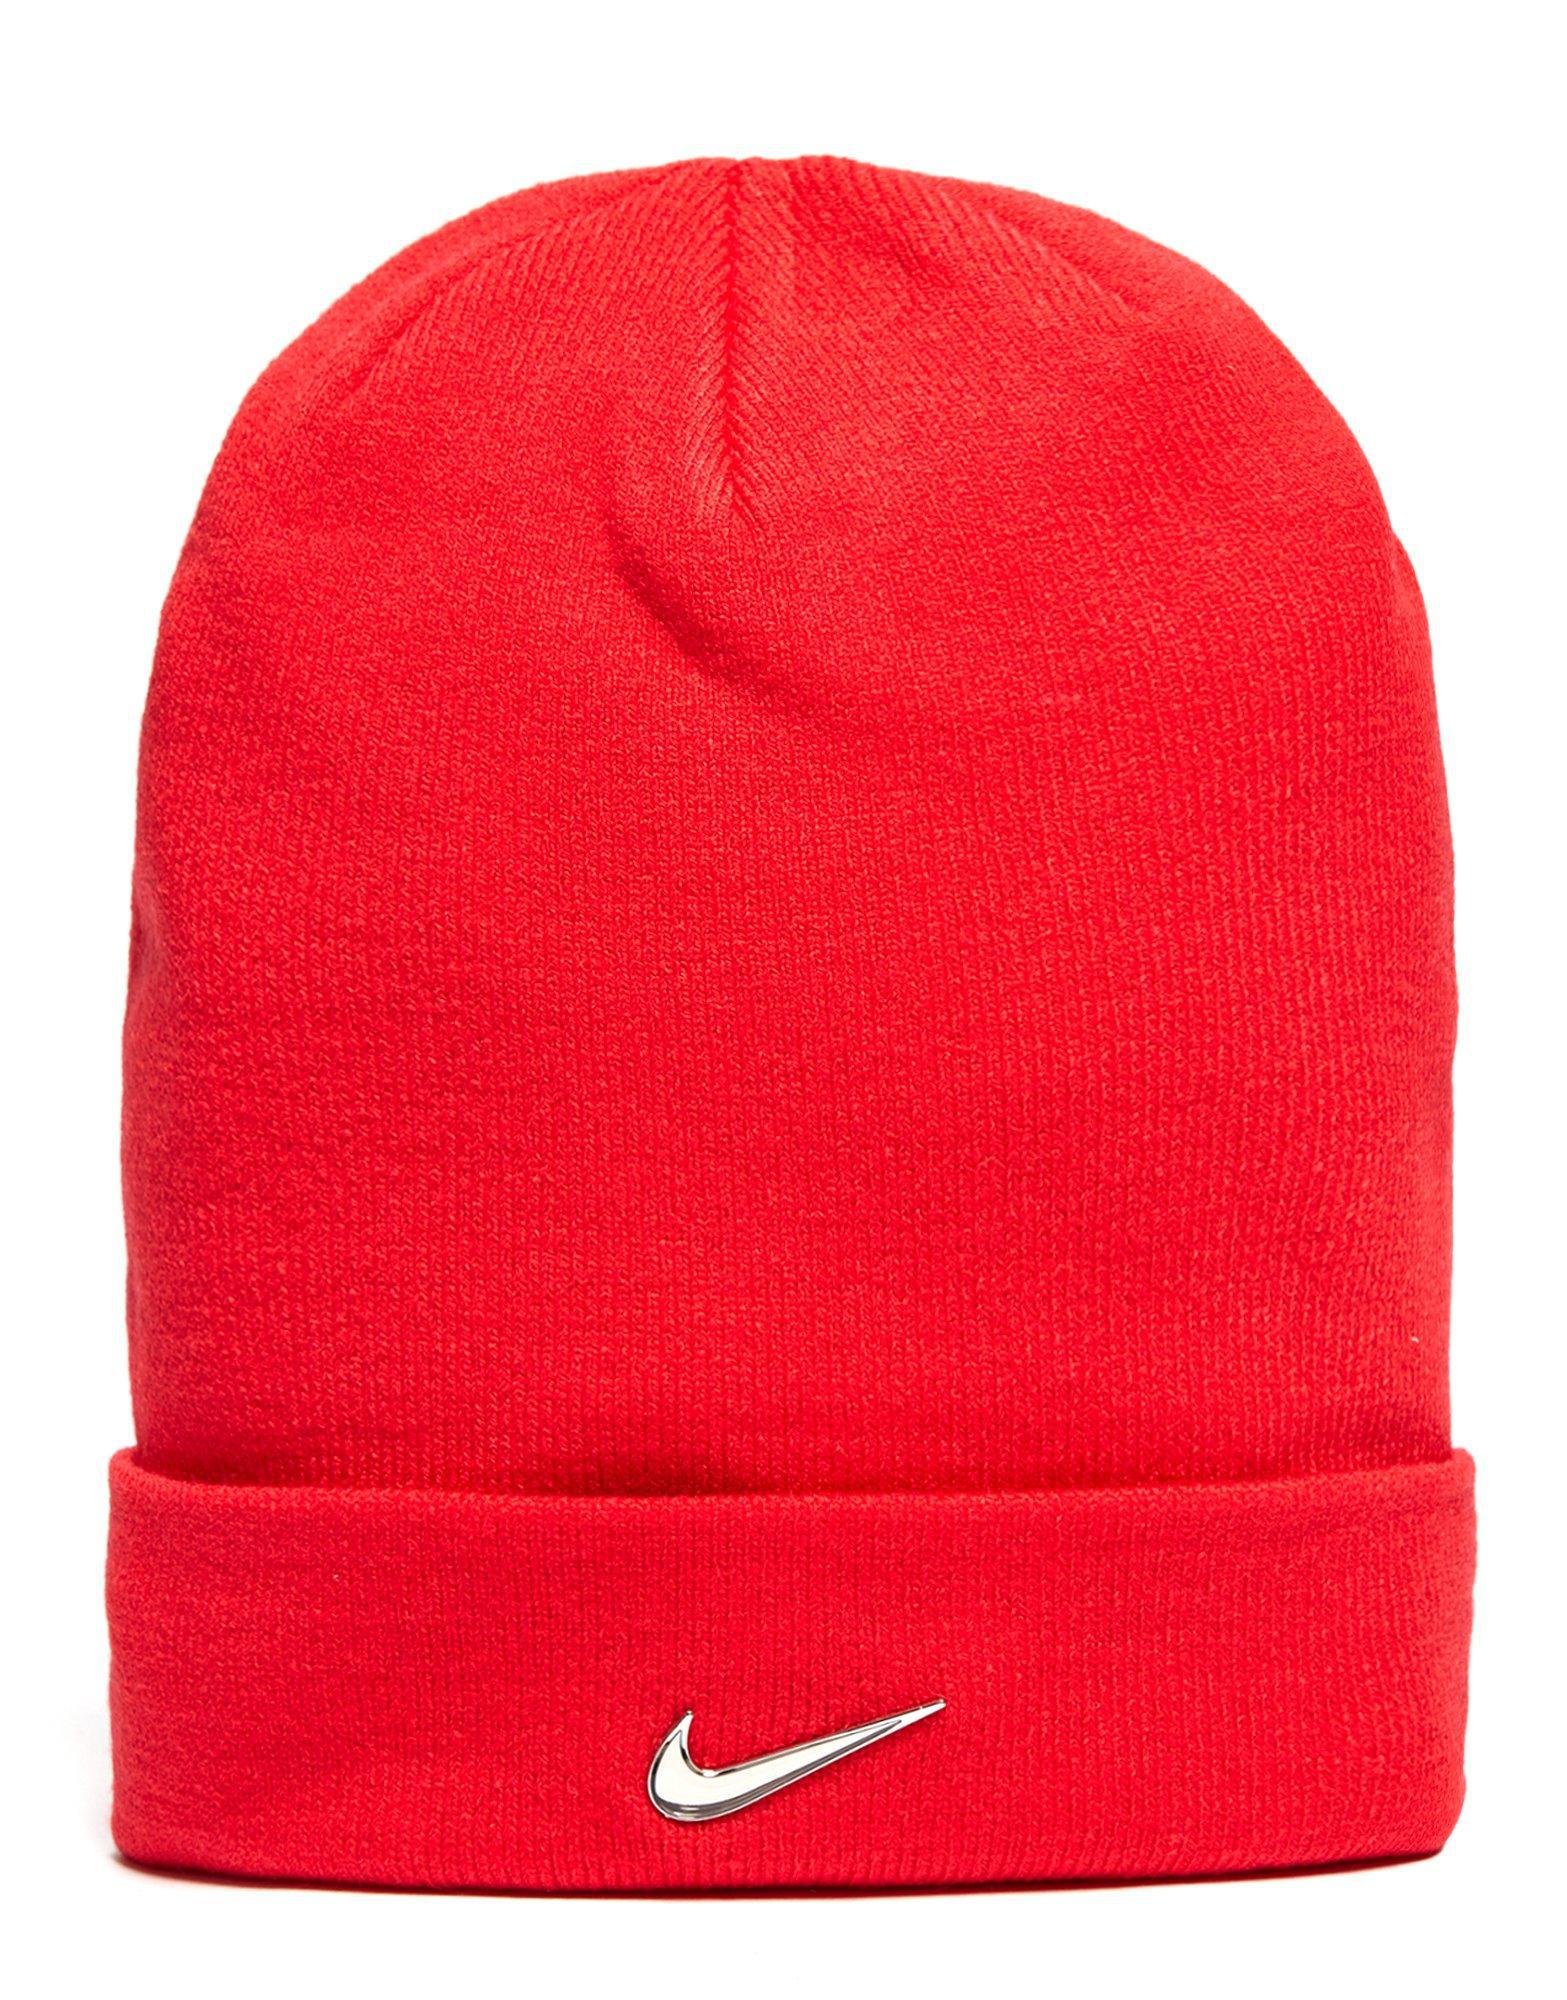 Nike Swoosh Beanie Hat in Red/Silver 